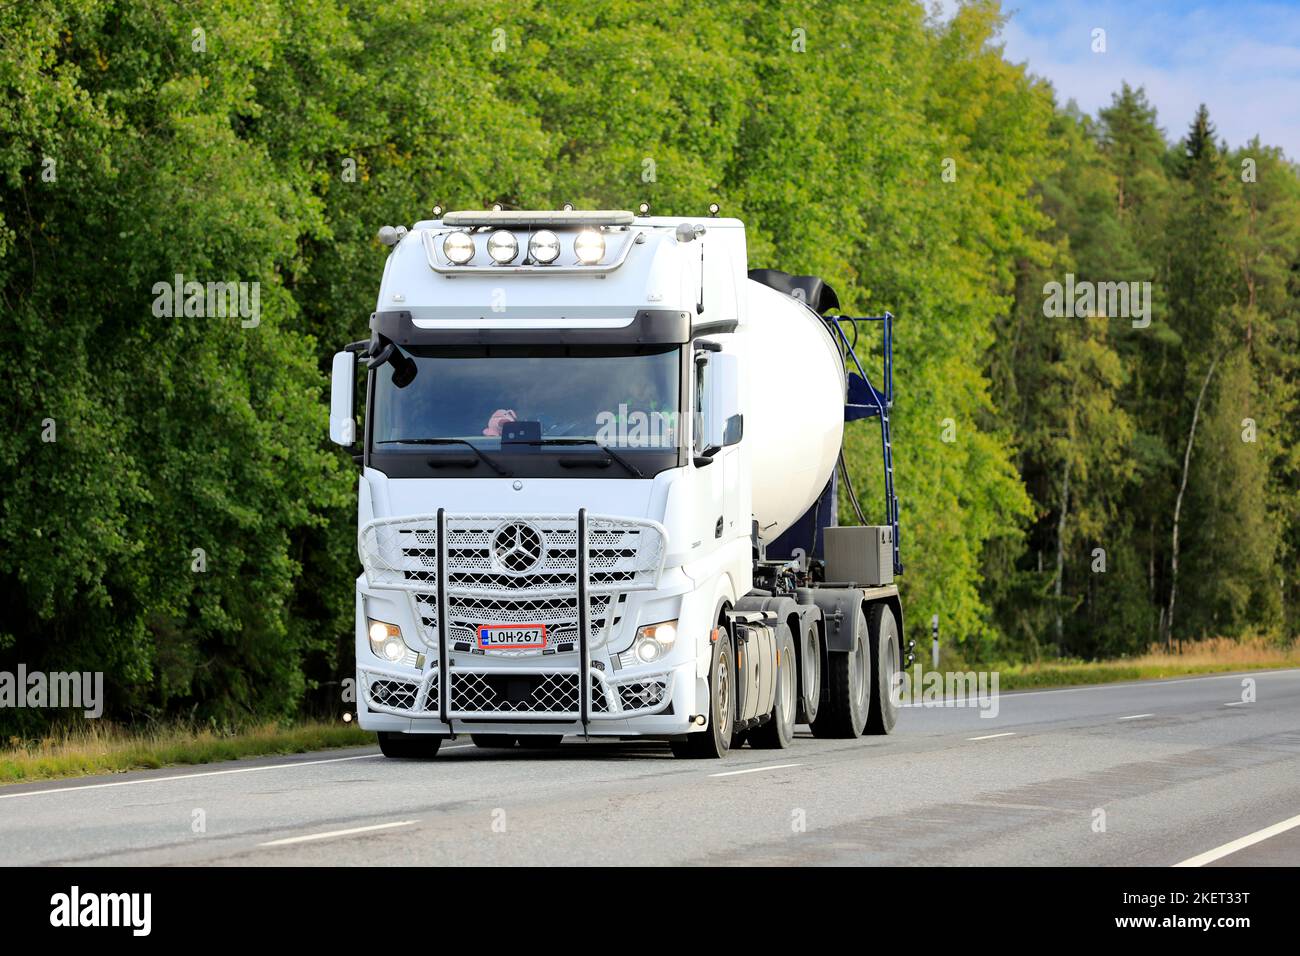 White Mercedes-Benz Actros 2853 concrete mixer truck at speed on highway, high beams briefly on. Marttila, Finland. September 11, 2020. Stock Photo